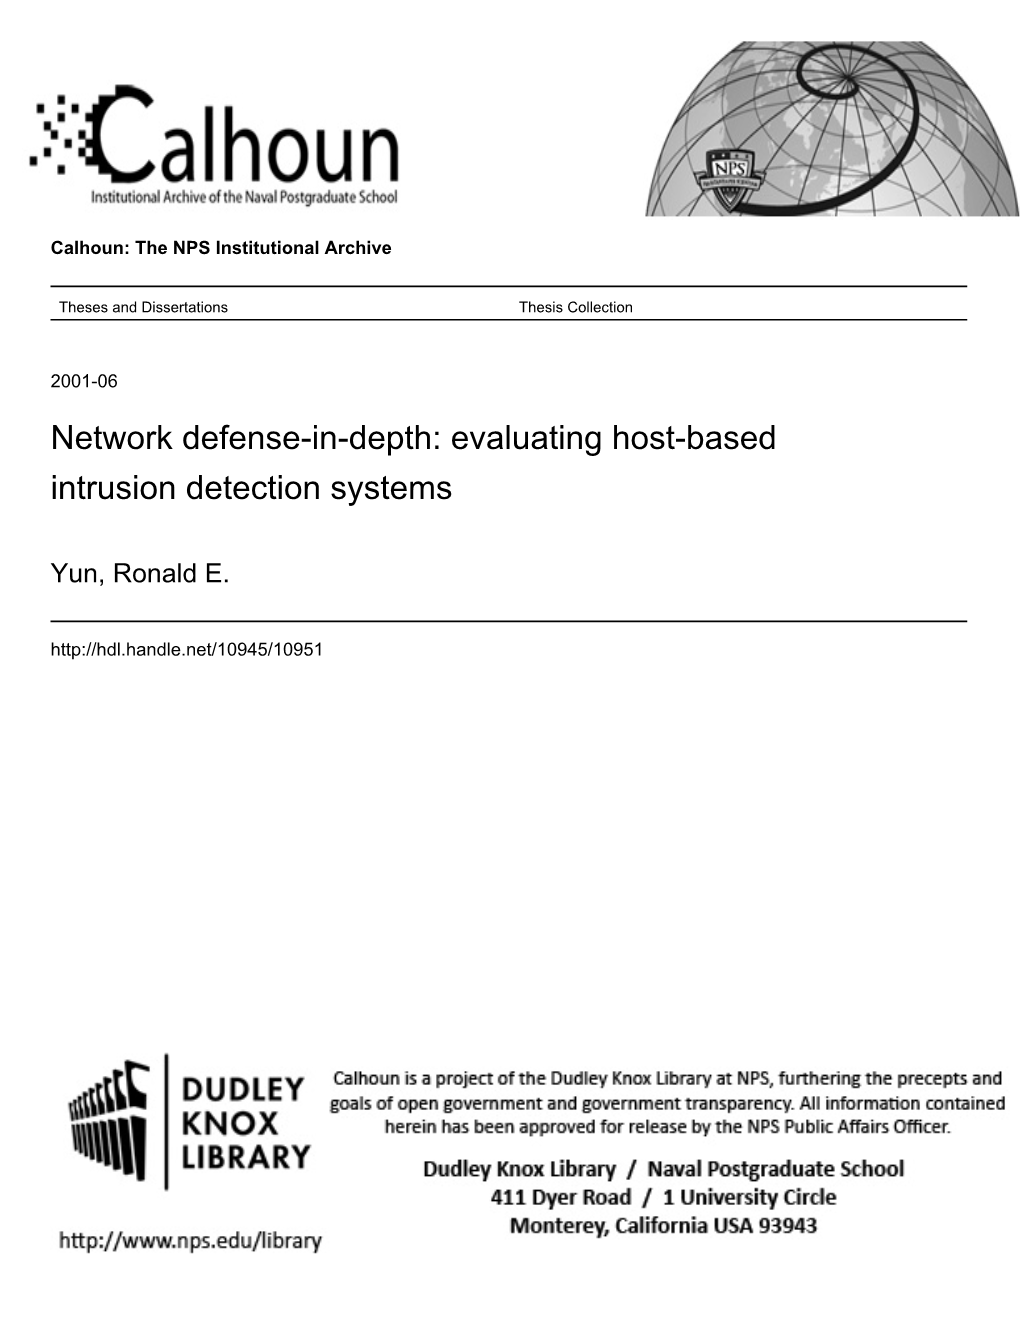 Evaluating Host-Based Intrusion Detection Systems